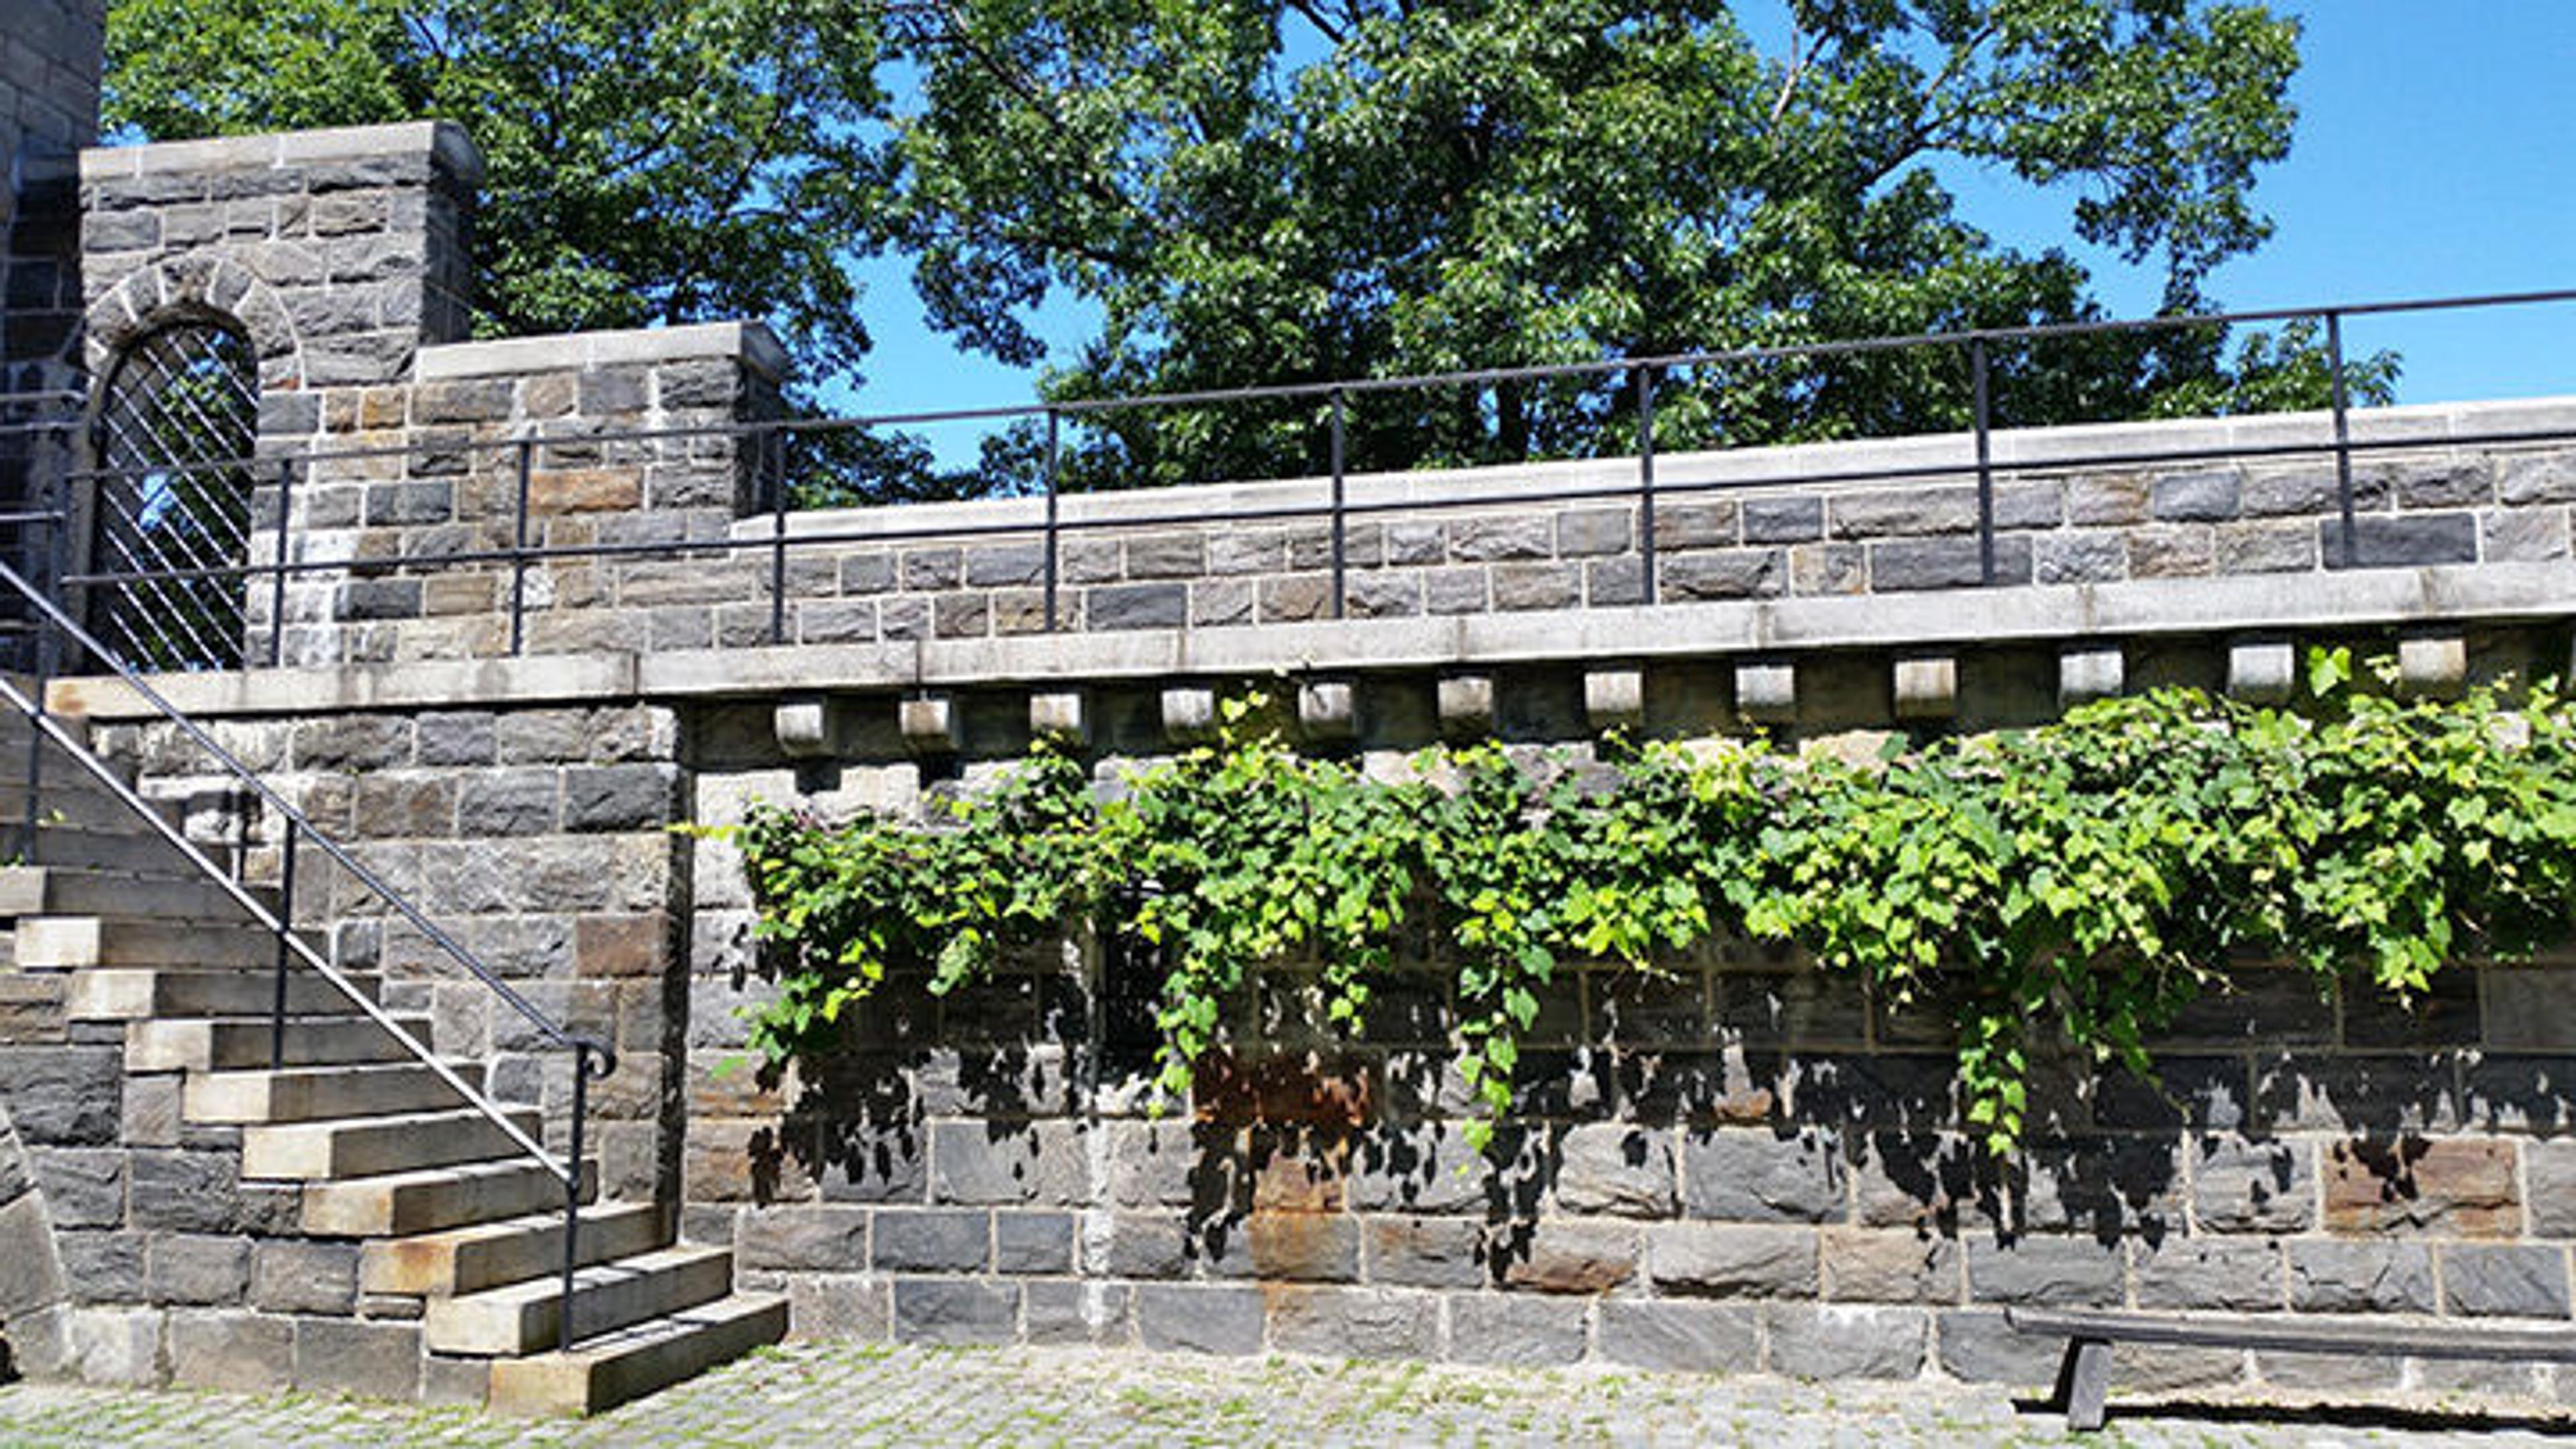 The ramparts of The Met Cloisters, with grapevines